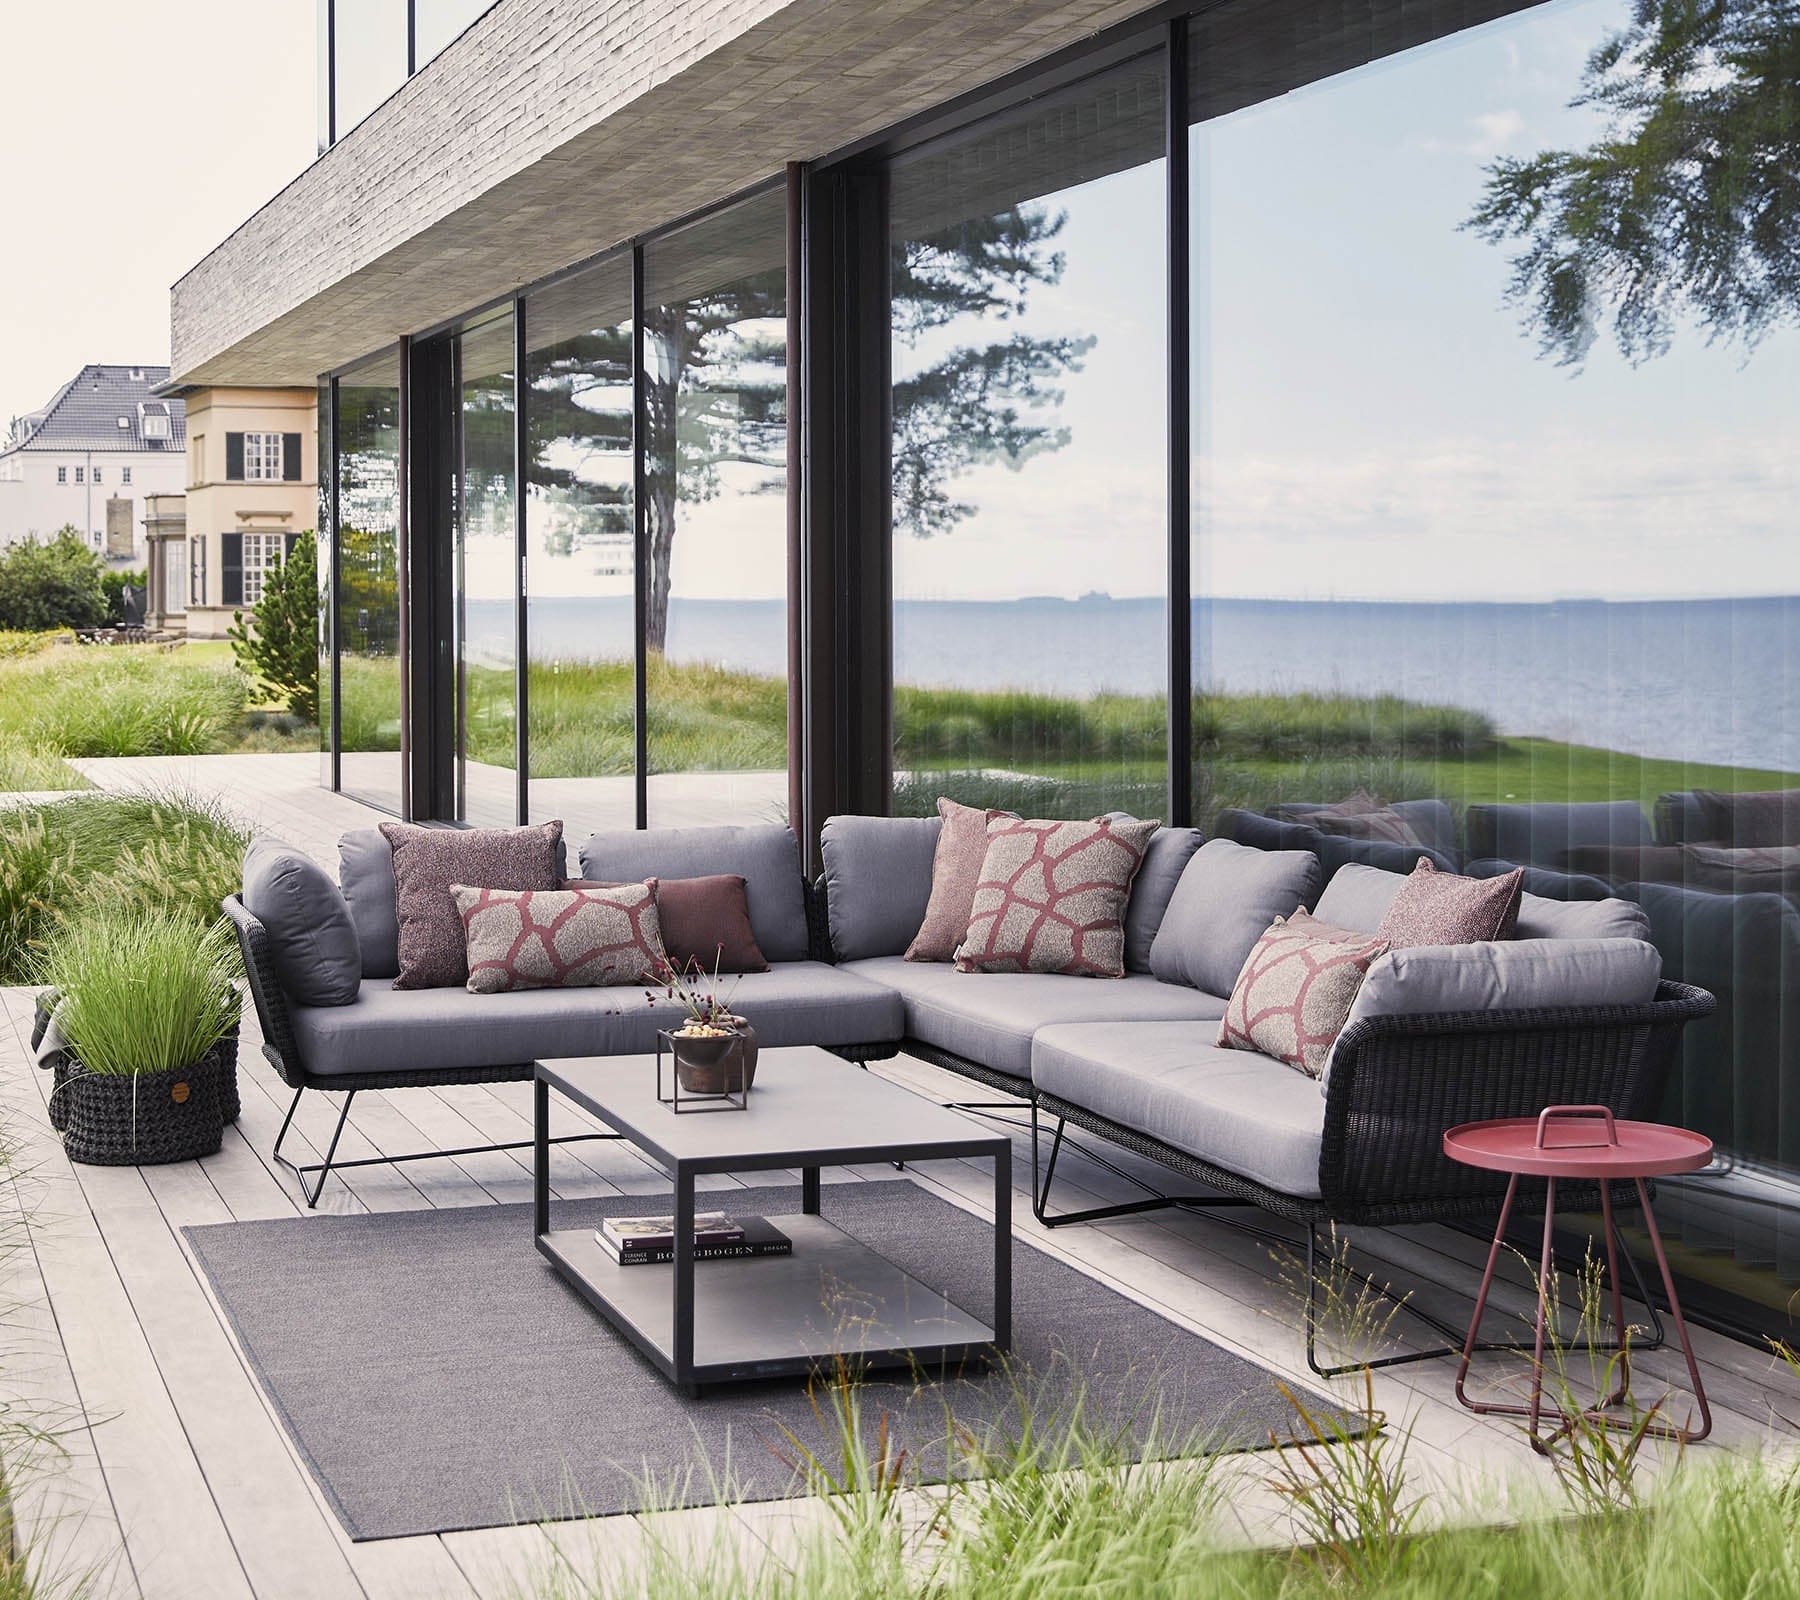 Boxhill's Horizon 2-Seater Outdoor Left Module Sofa lifestyle image together with Horizon 2-Seater Outdoor Right Module Sofa beside glass wall at patio, with rectangular table at the center and a small round side table at the side